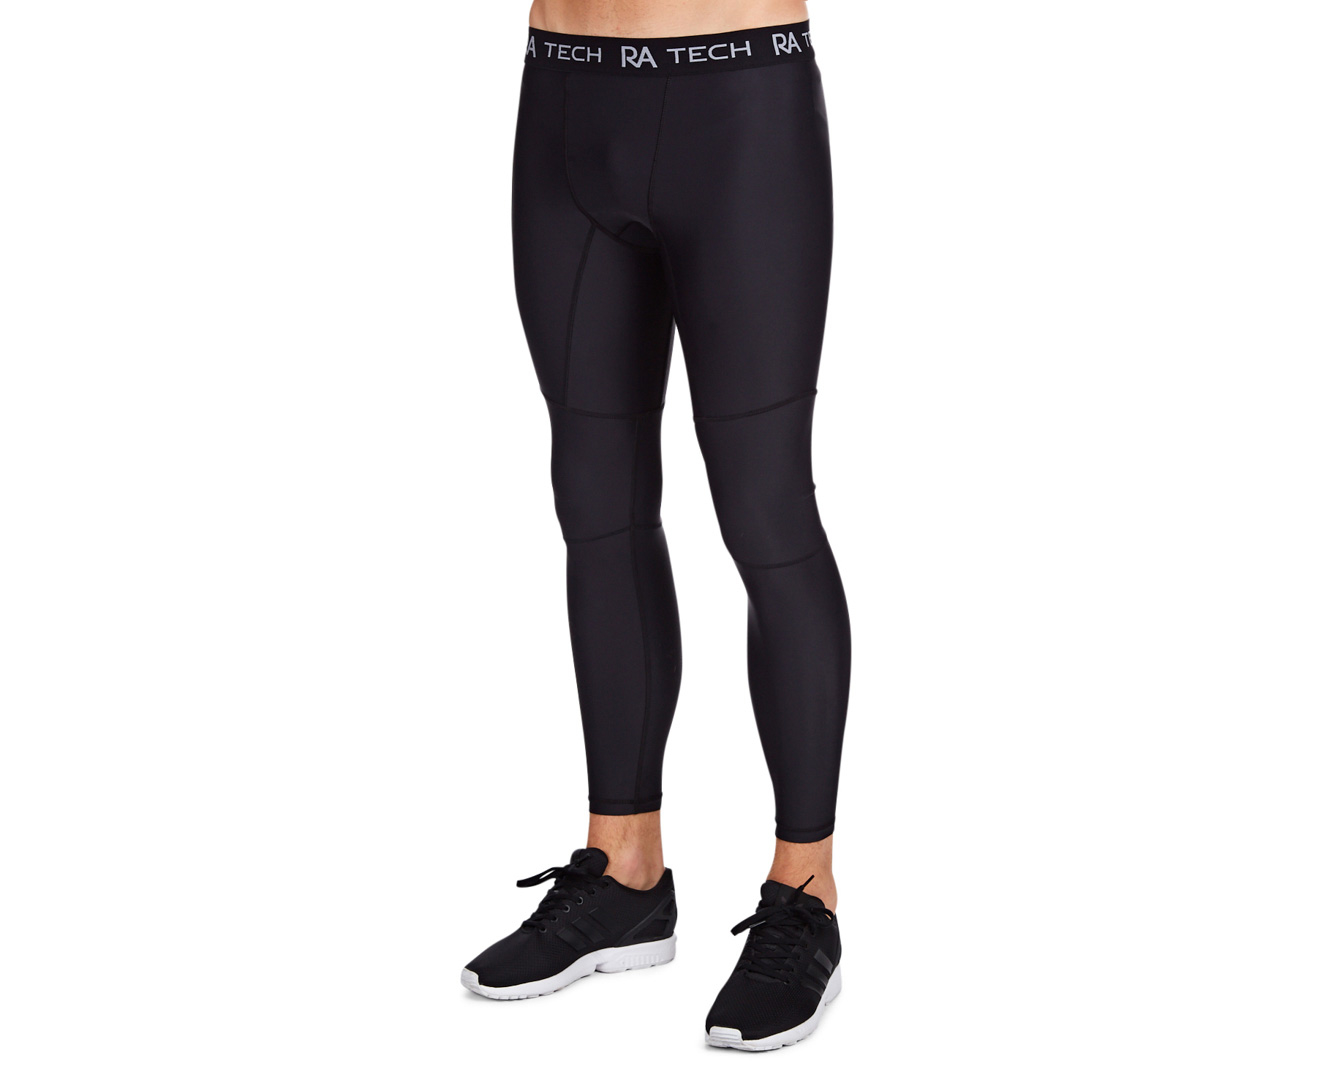 russell athletic compression tights